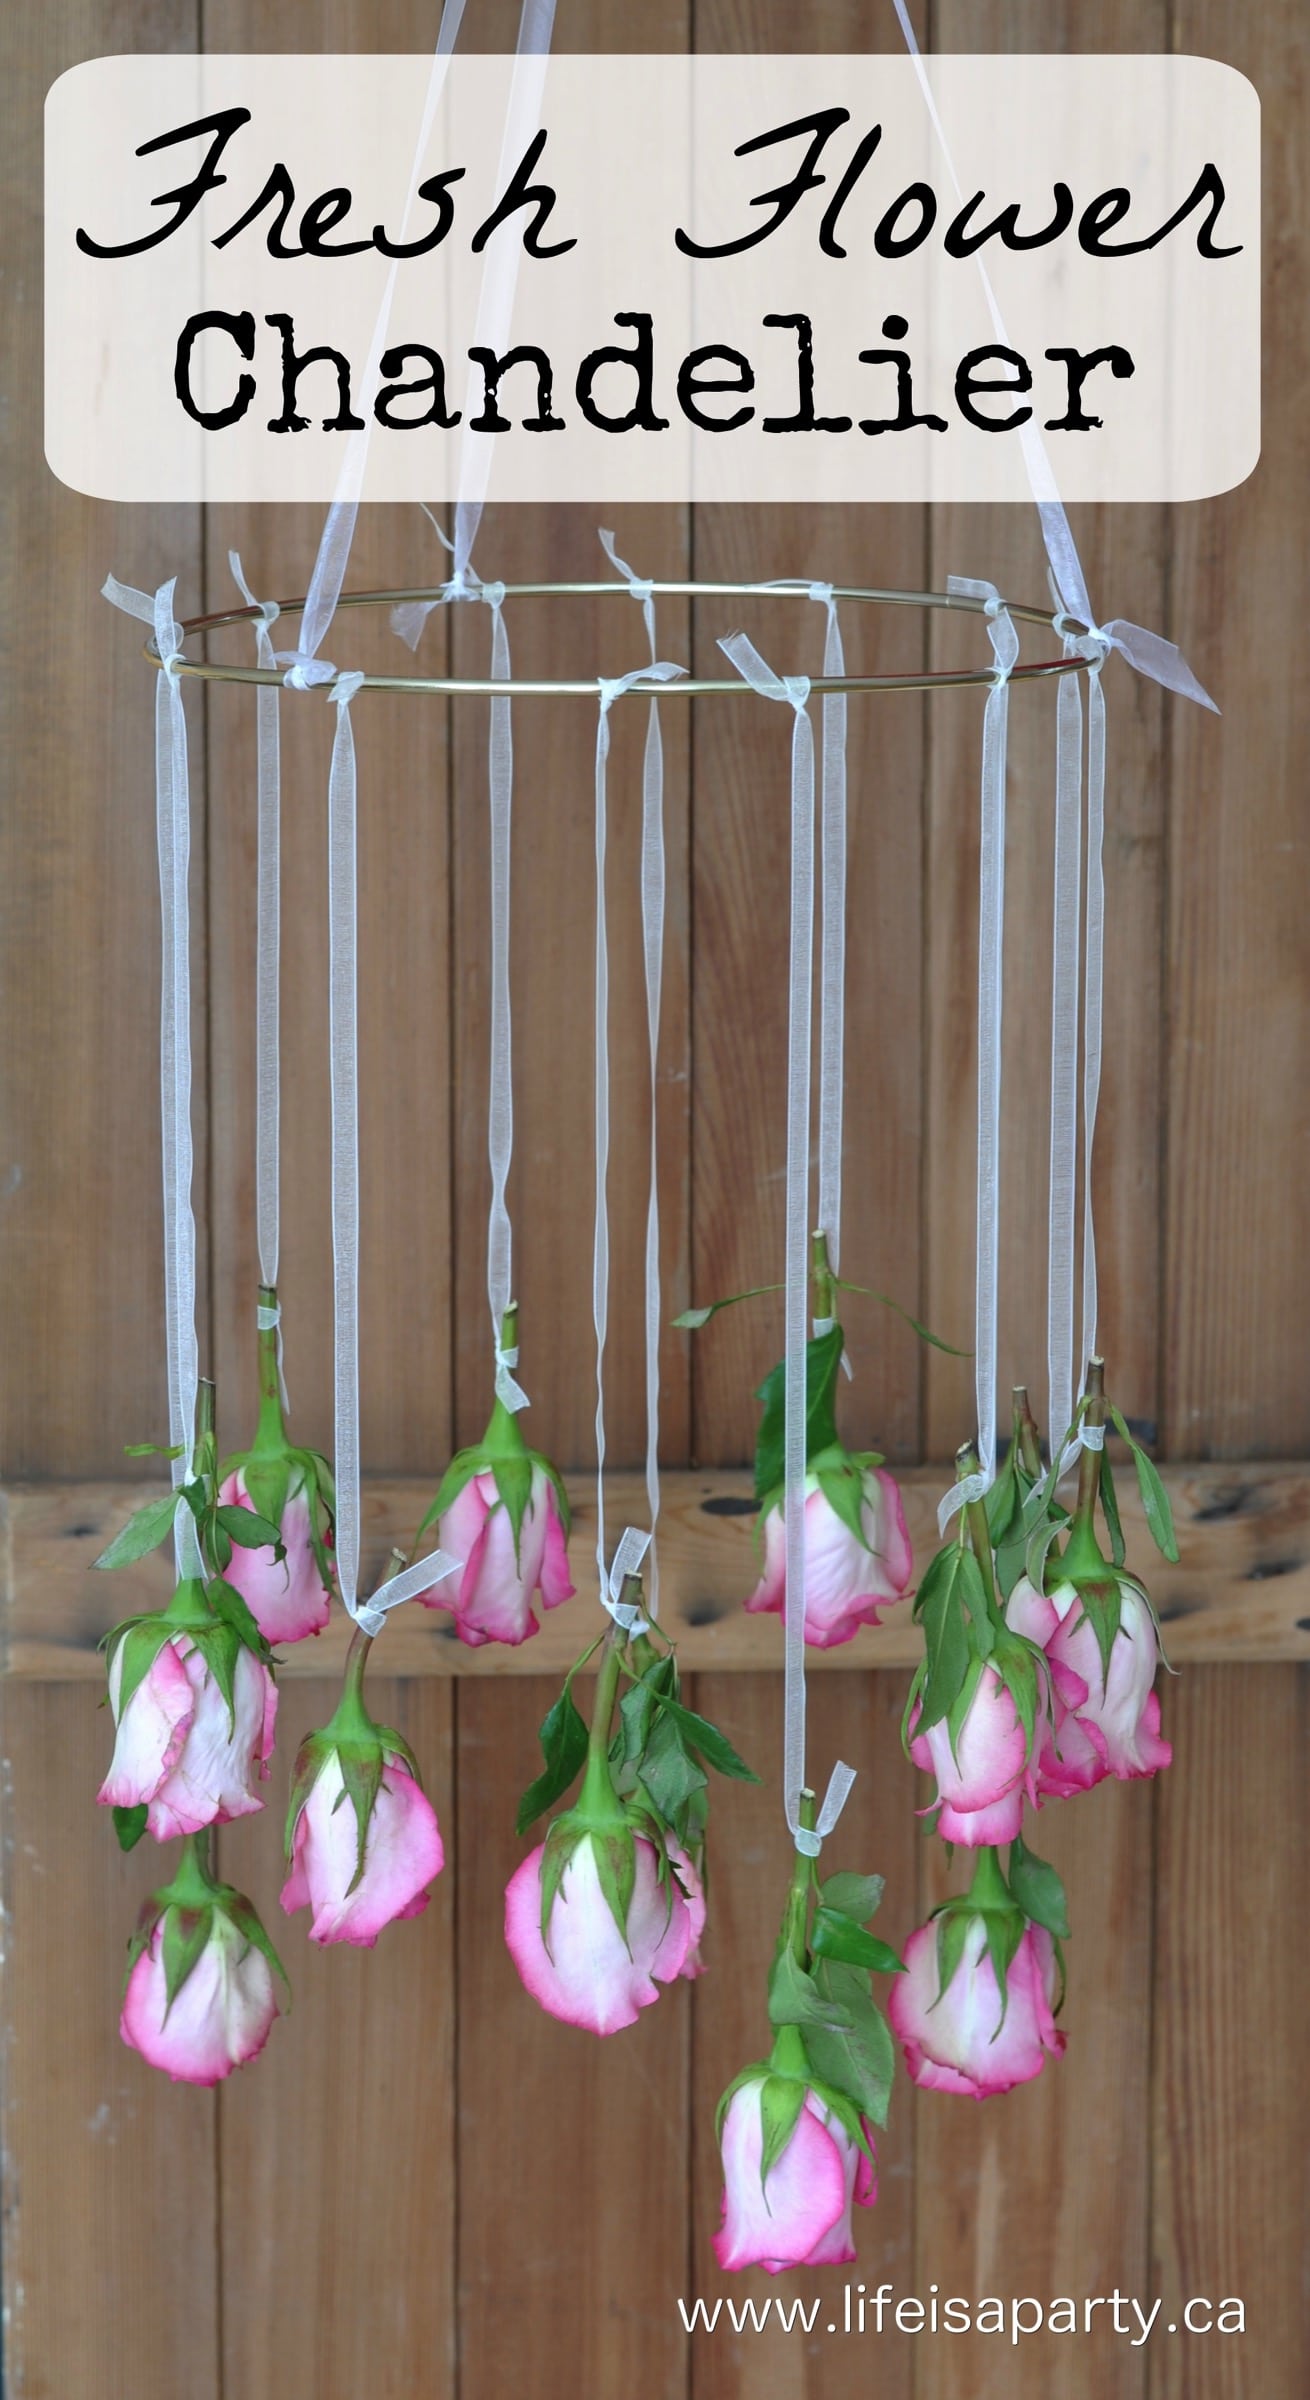 DIY Flower Chandelier: Easy to make,perfect for special occasions, the fresh flowers dry beautifully too. Perfect for Valentine's Day, weddings, or showers.